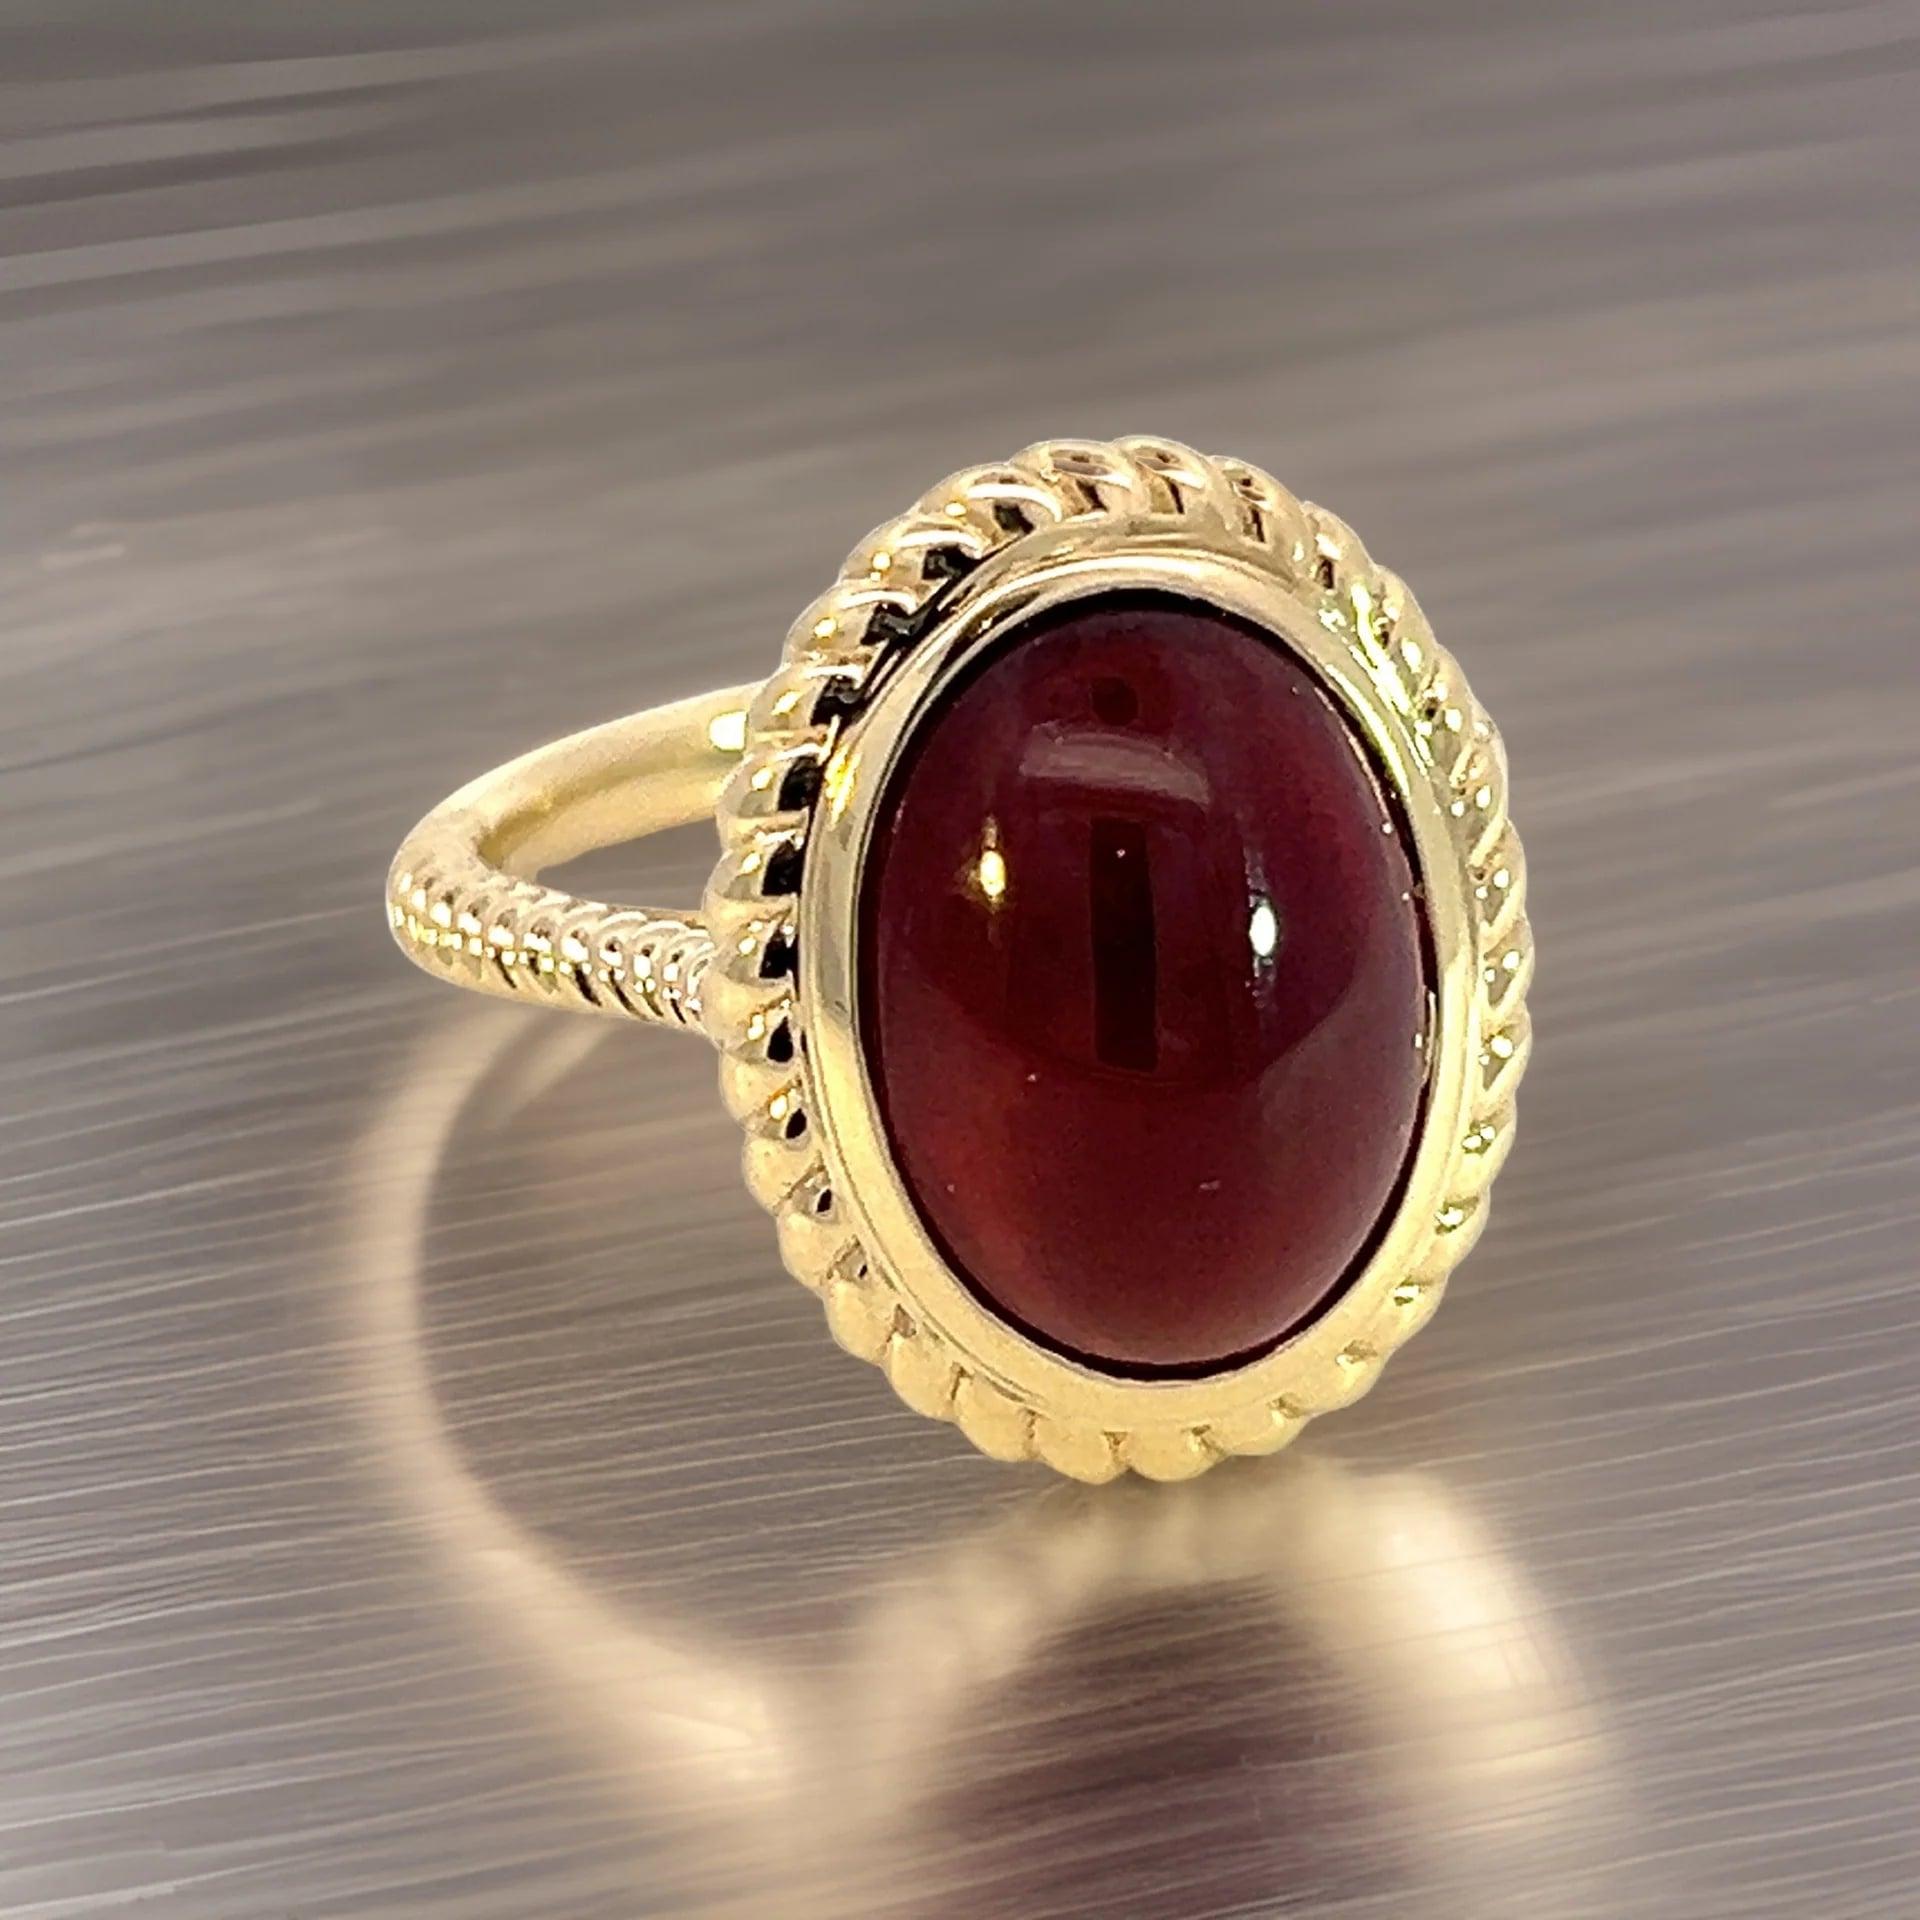 Oval Cut Natural Solitaire Spessartite Garnet Ring 6.5 14k Y Gold 8.08 Cts Certified For Sale